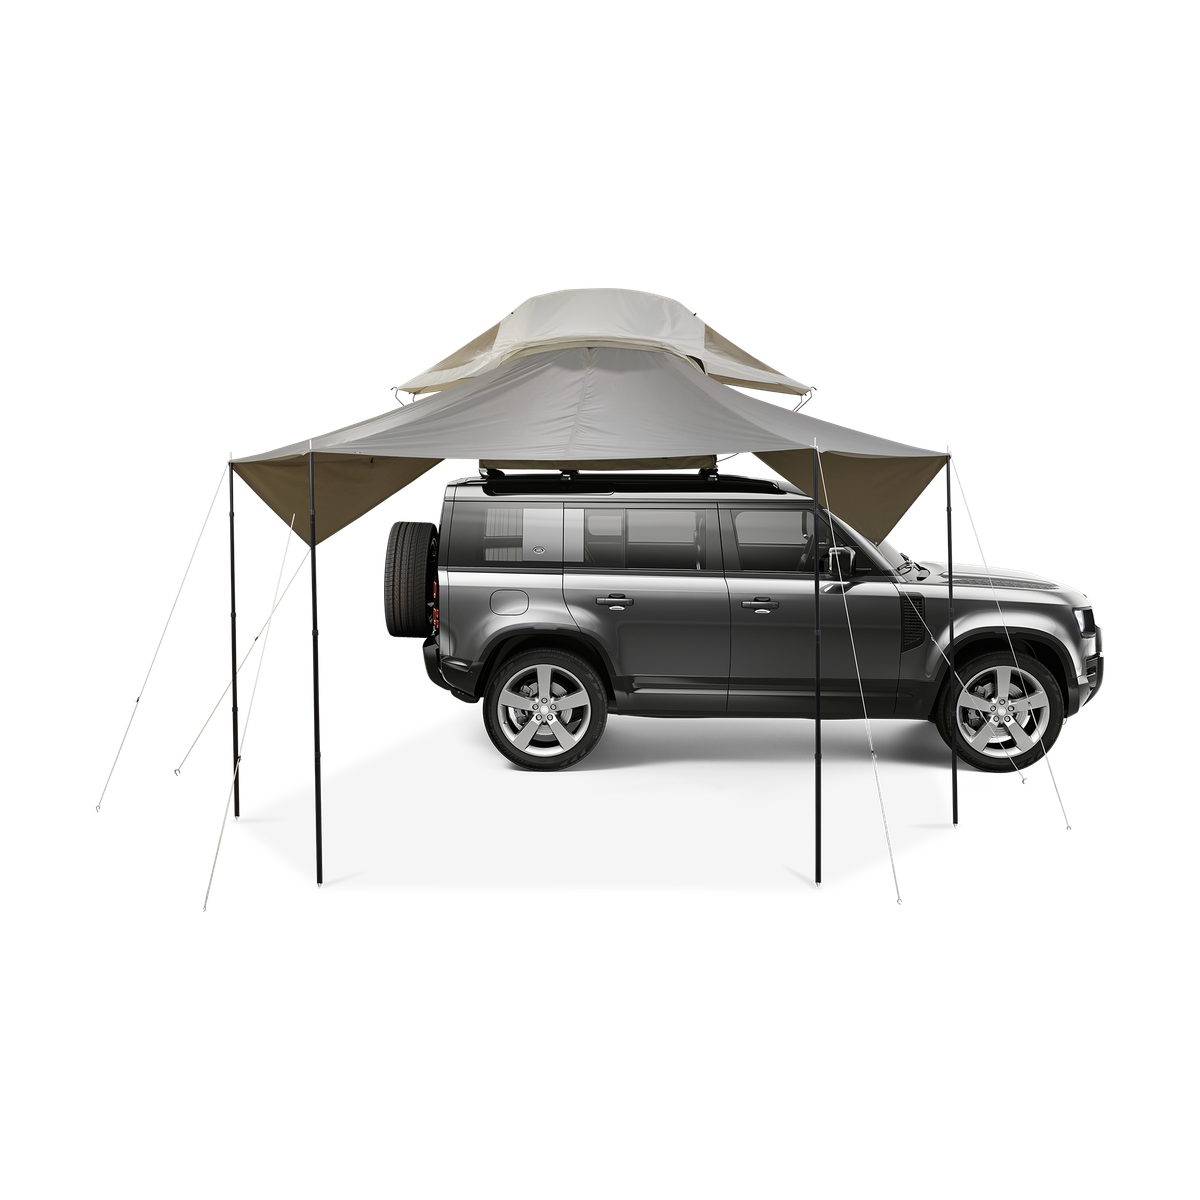 Thule Approach Awning L 4-person roof top tent awning